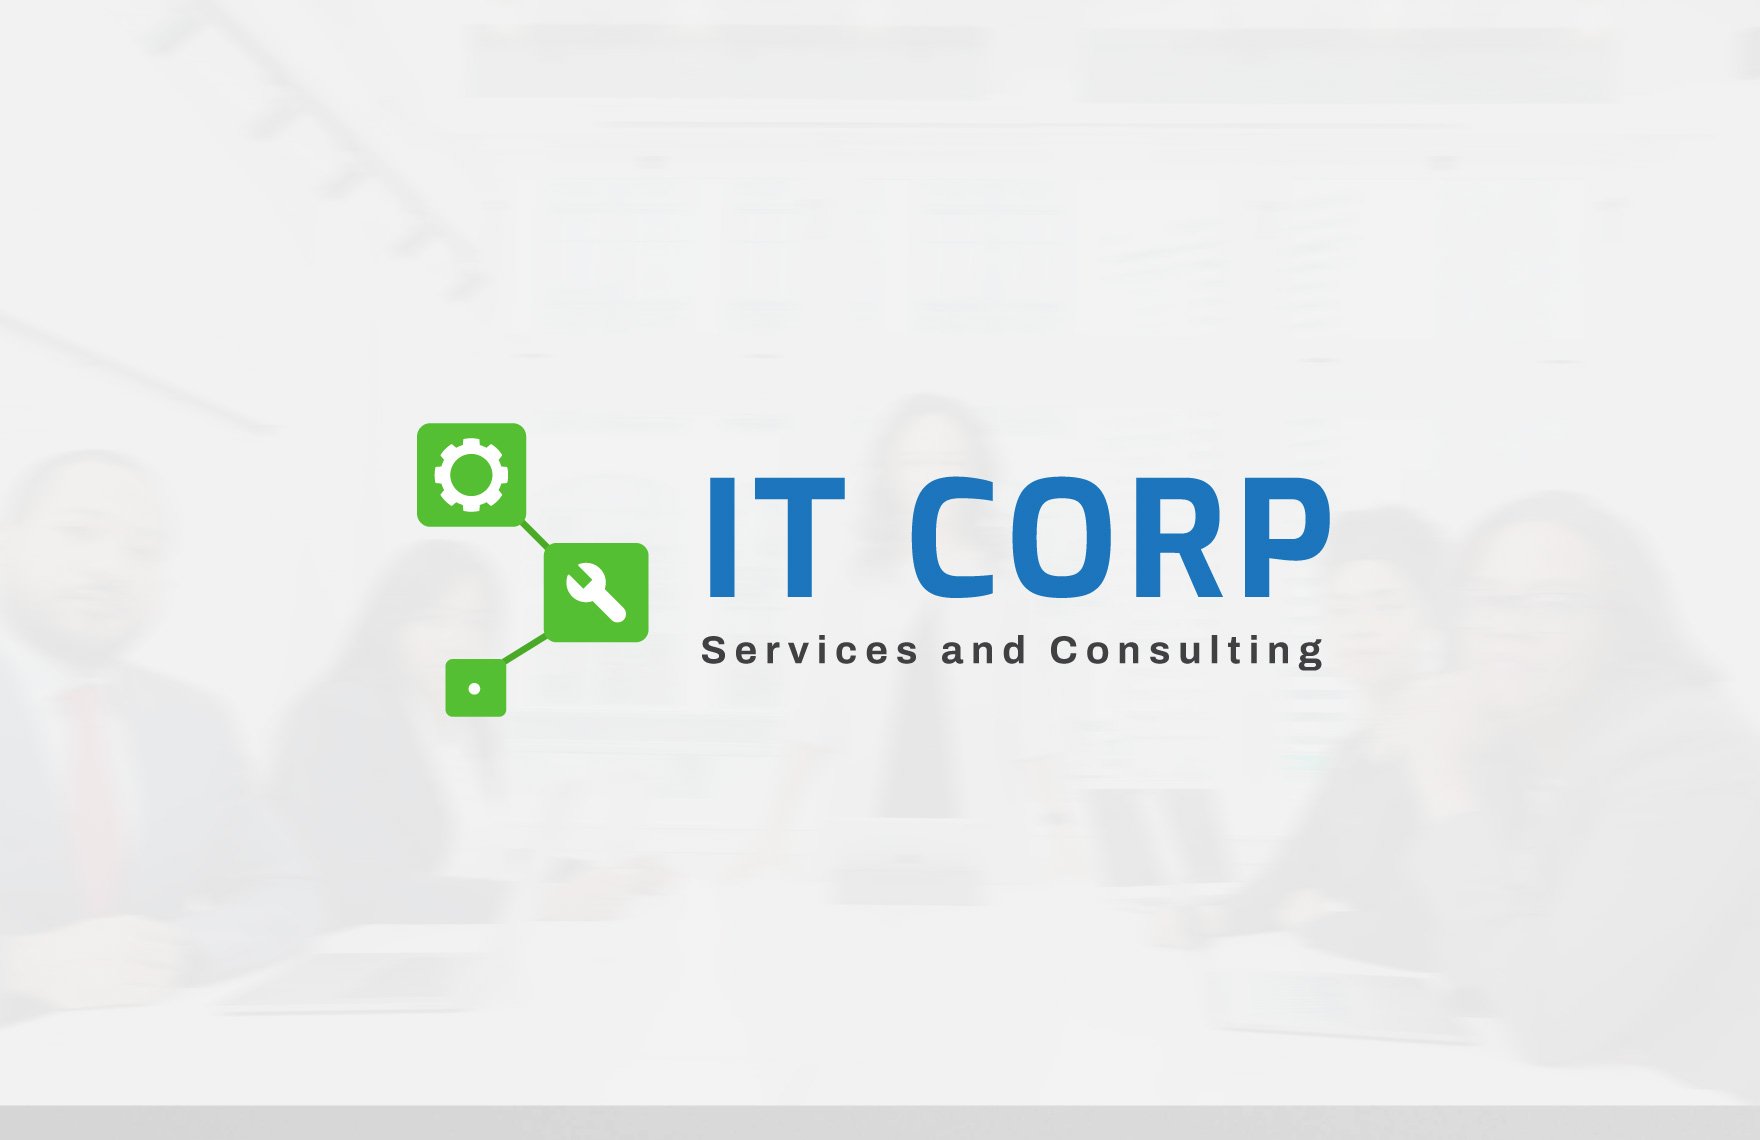 Managed IT Services Logo Template in Word, Illustrator, PSD, SVG, PNG